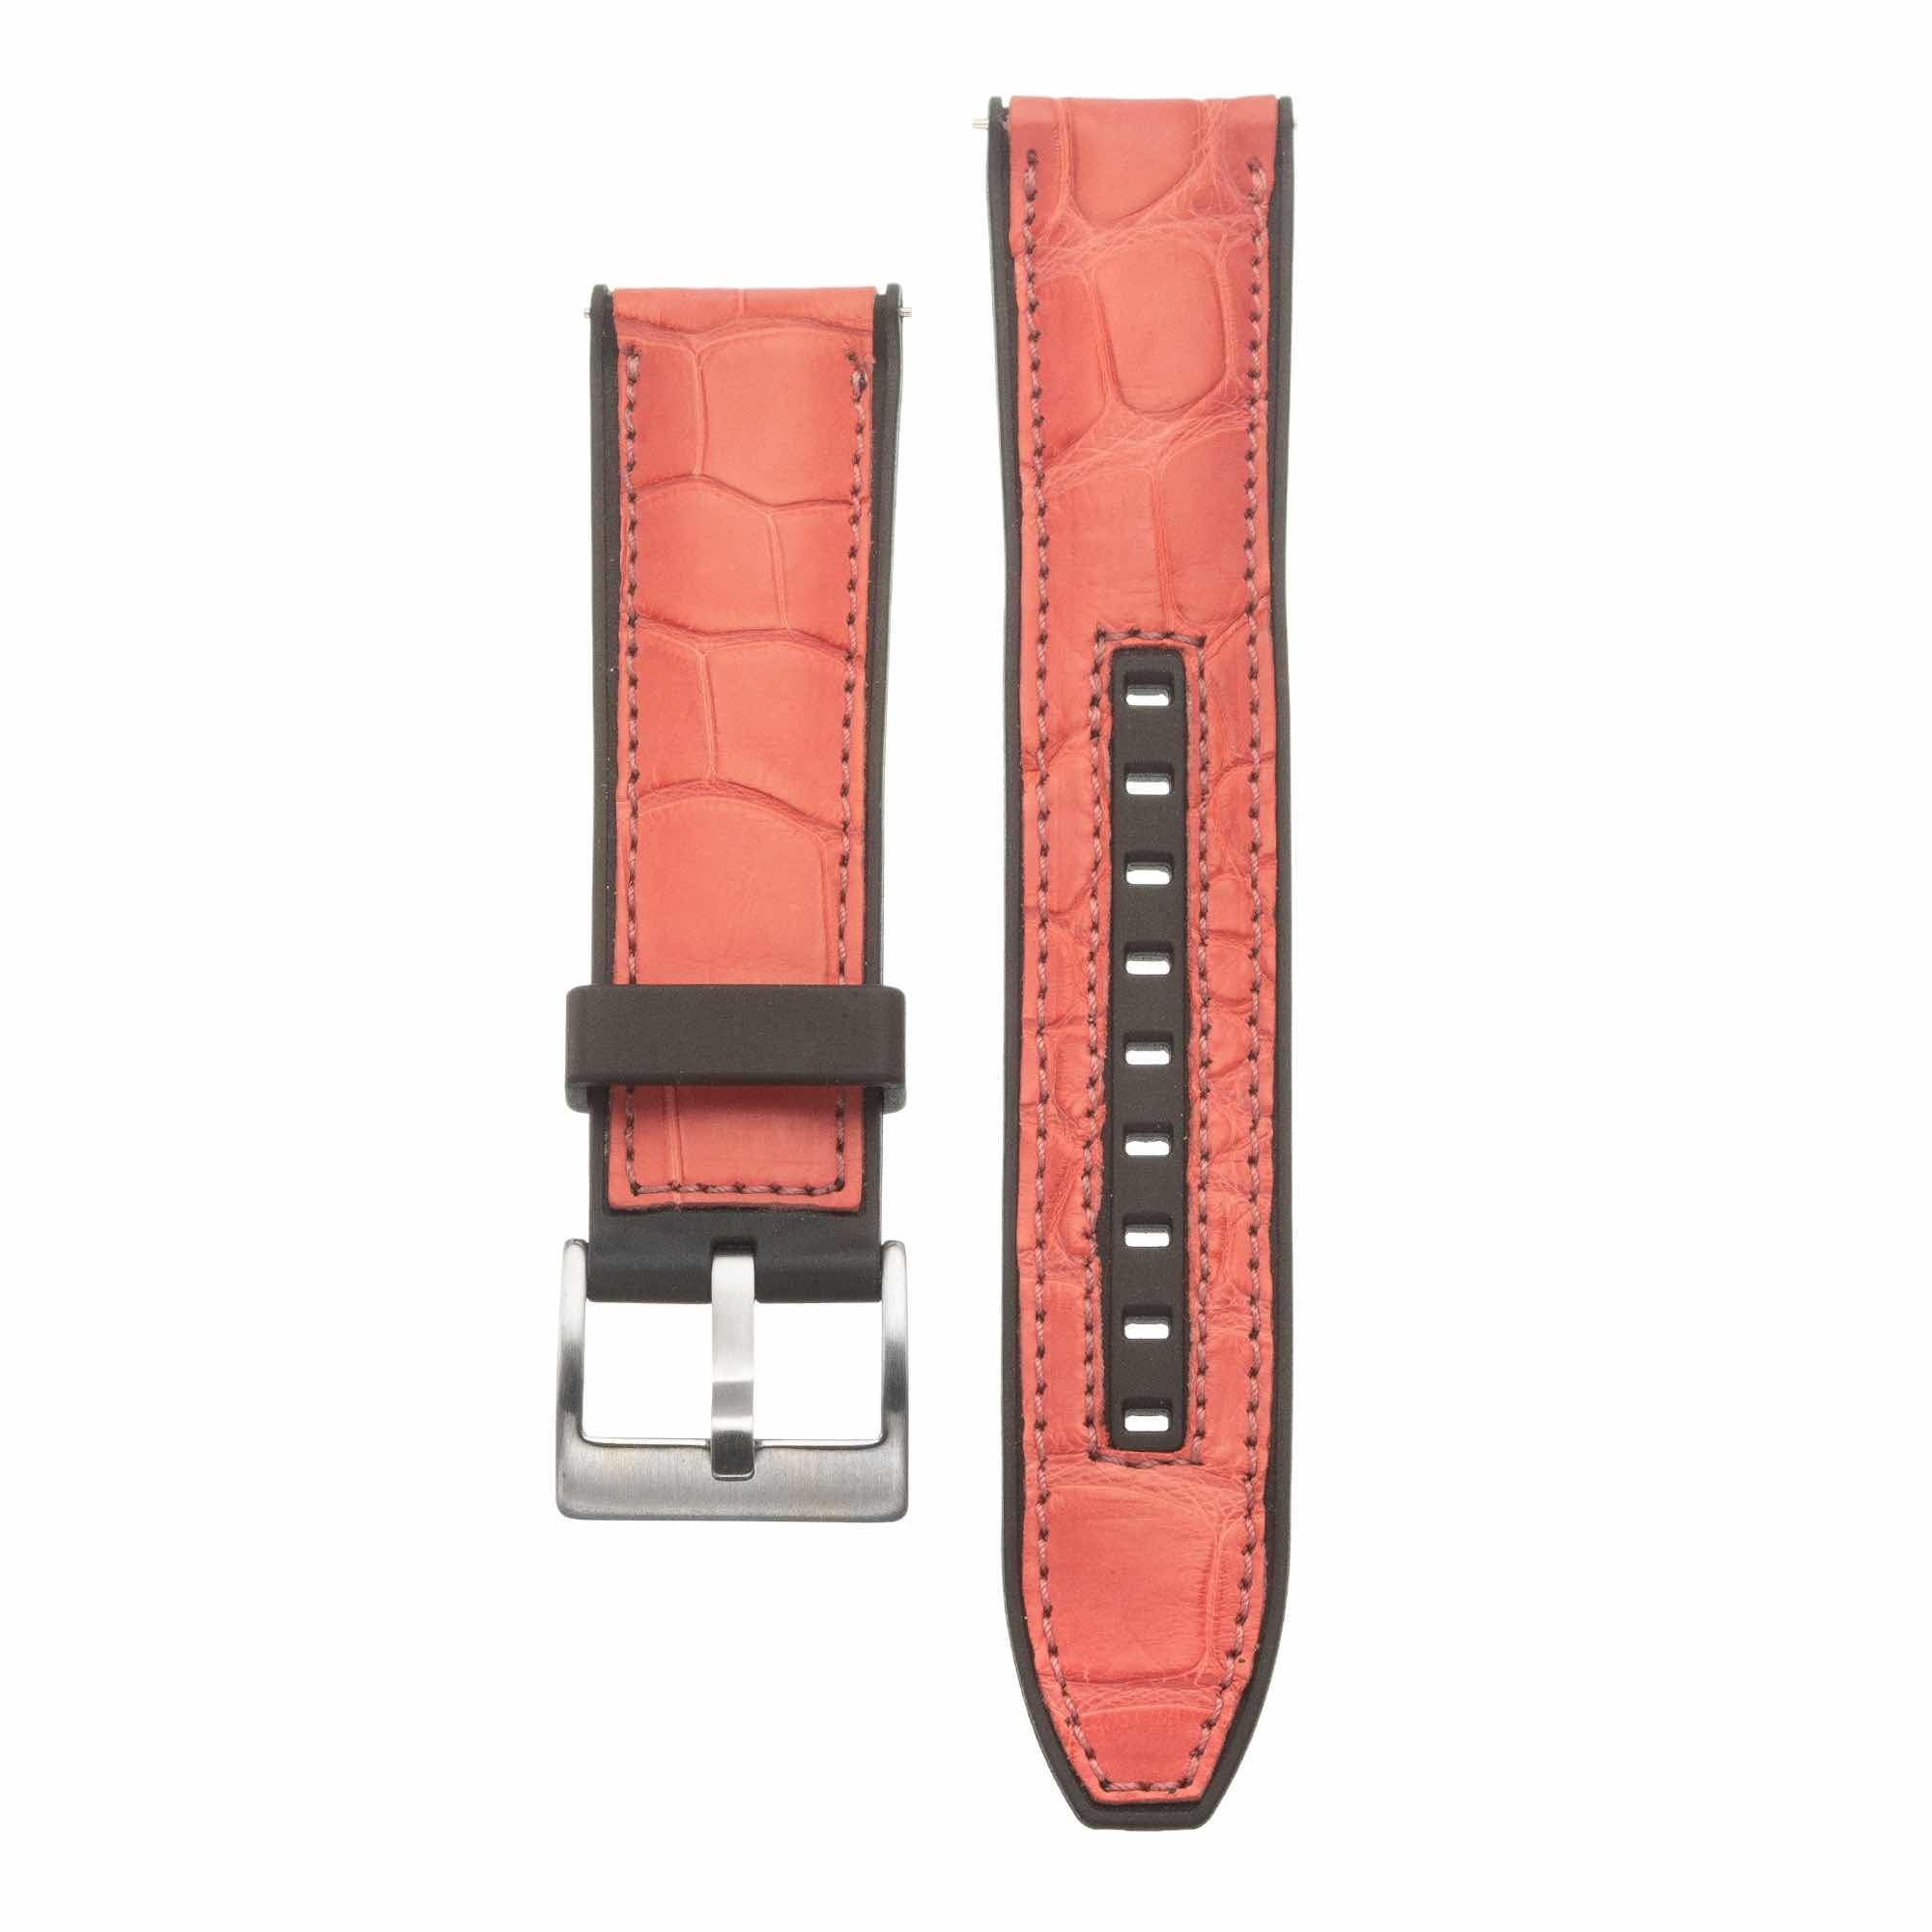 Canvas straps - Hermes Visconti Milano watch straps handcrafted in Italy